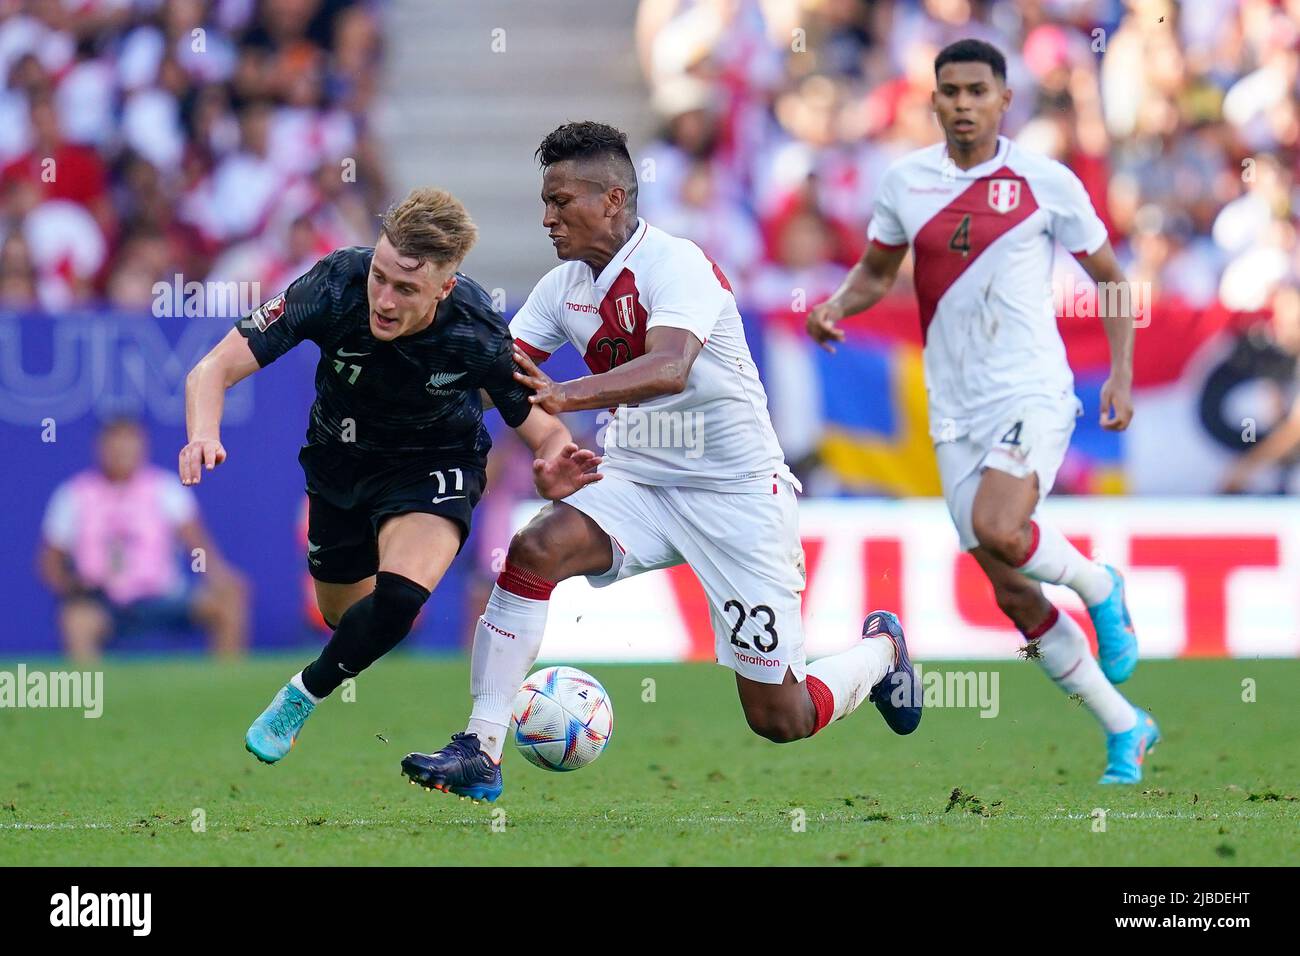 Barcelona, Spain. June 5, 2022, Alex Greive of New Zealand and Santiago Ormeno of Peru during the friendly match between Peru and New Zealand played at RCDE Stadium on June 5, 2022 in Barcelona, Spain. (Photo by Bagu Blanco / PRESSINPHOTO) Stock Photo